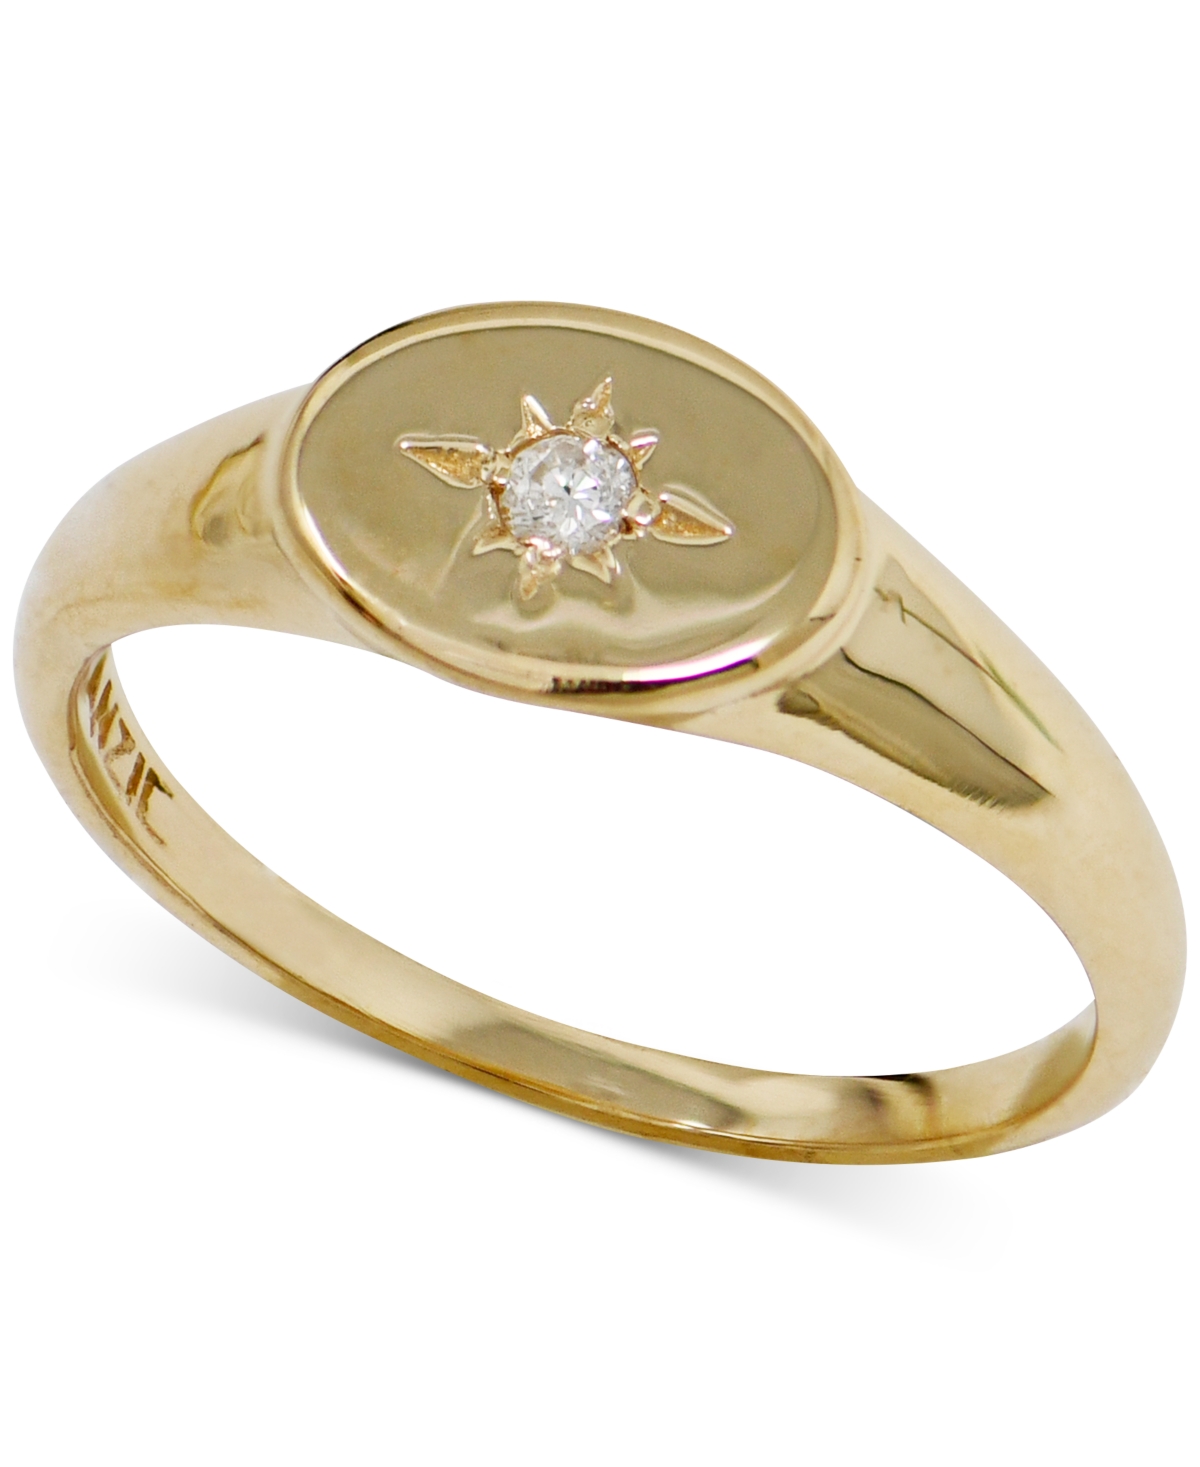 Diamond Accent Oval Signet Ring in 14k Gold - Gold